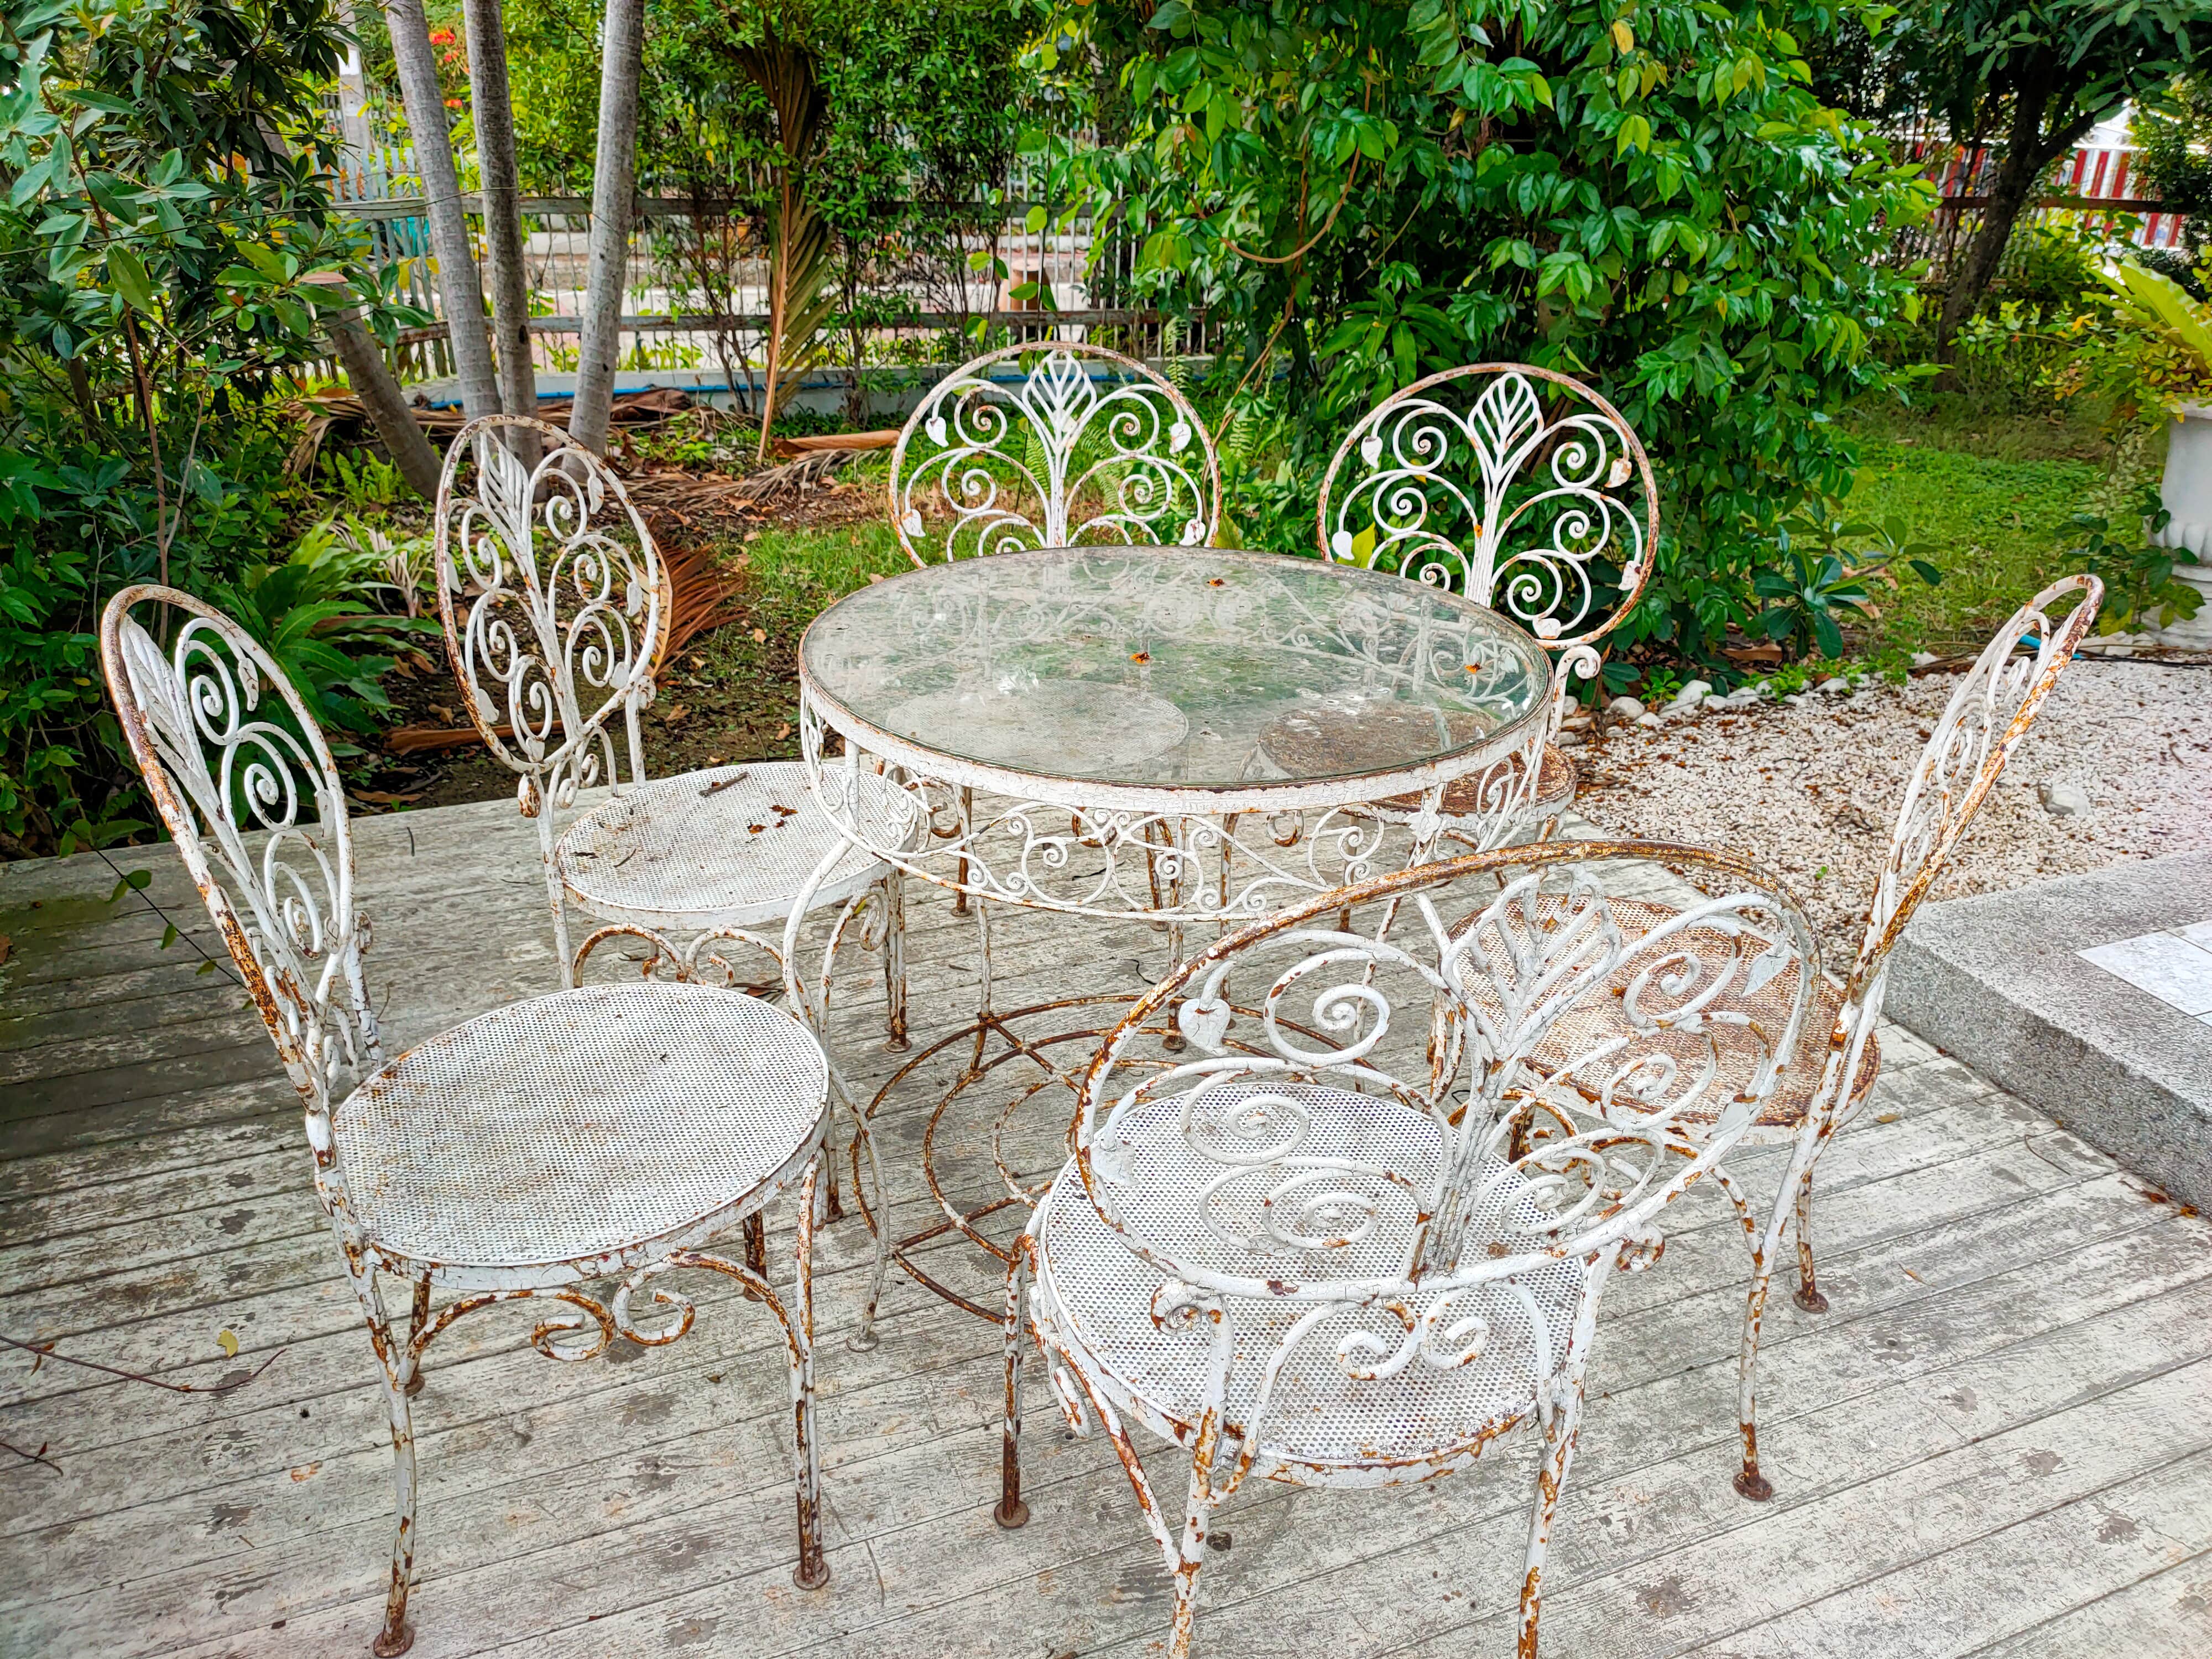 ld Patio Furniture Disposal Options in North Port